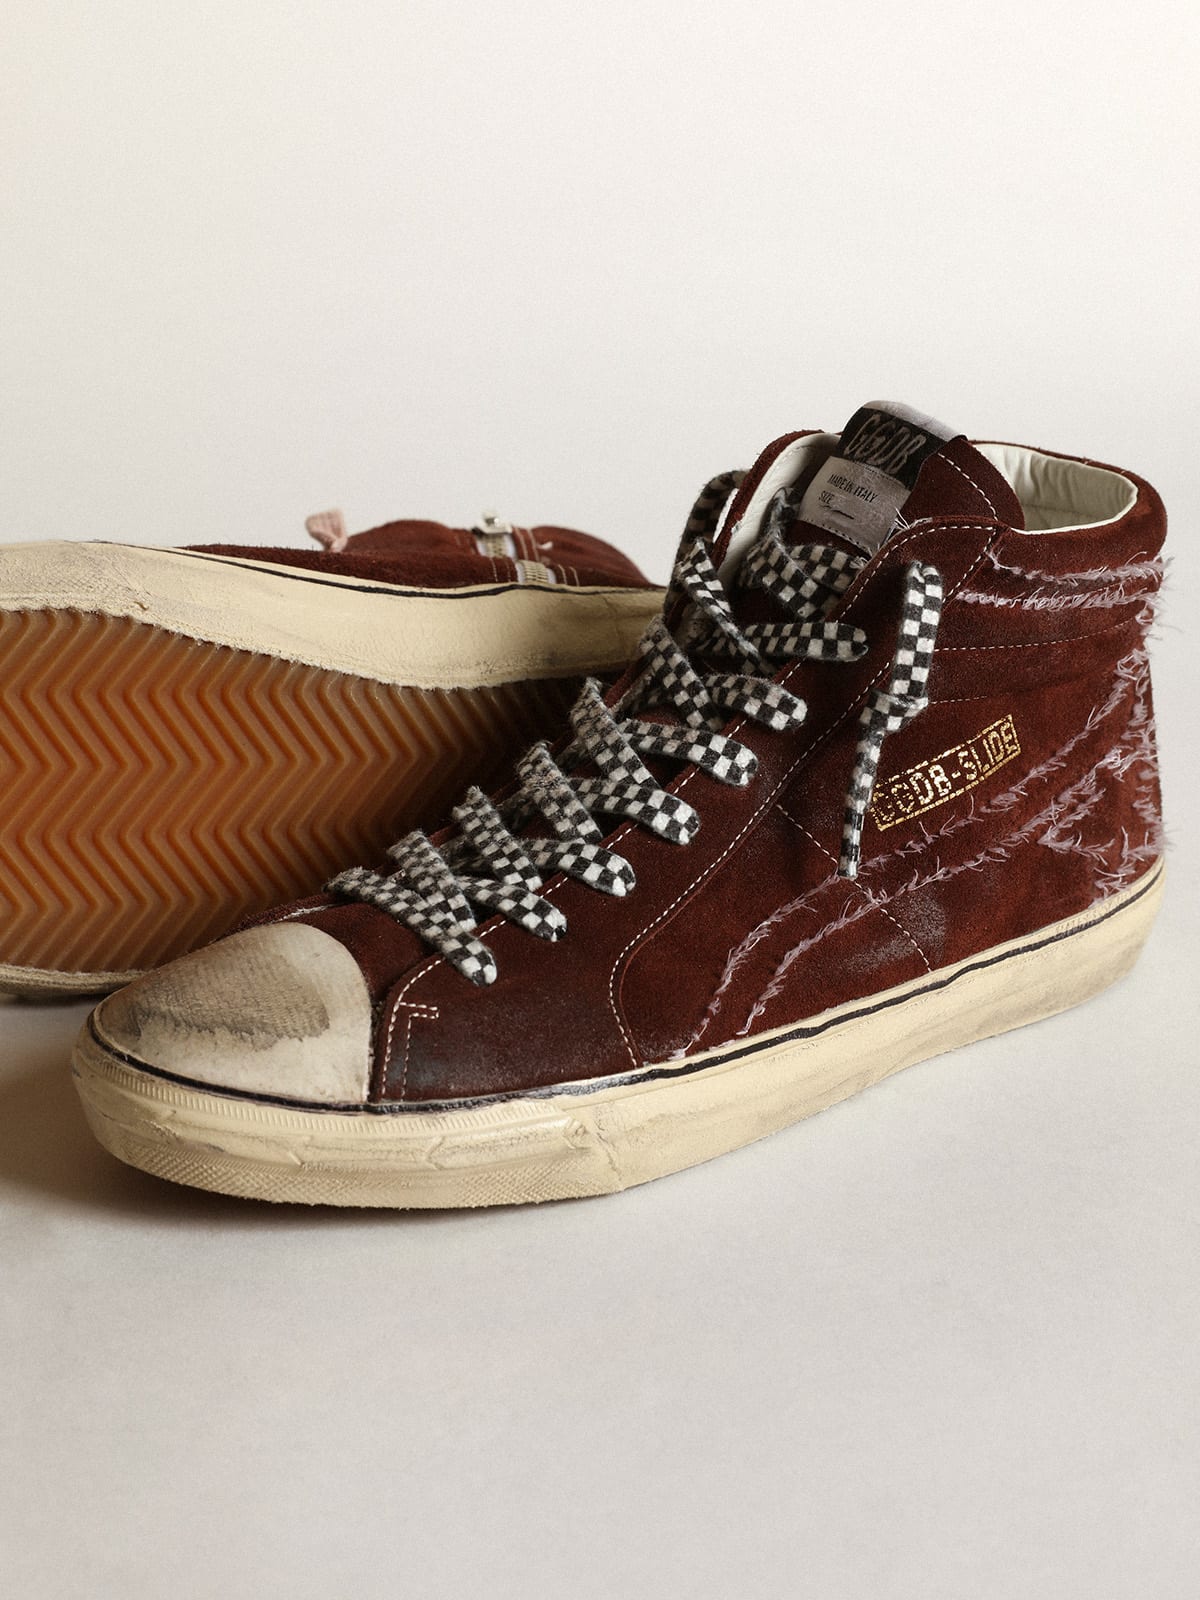 Golden Goose - Slide sneakers in chocolate-colored suede with white stitching on the star and flash in 